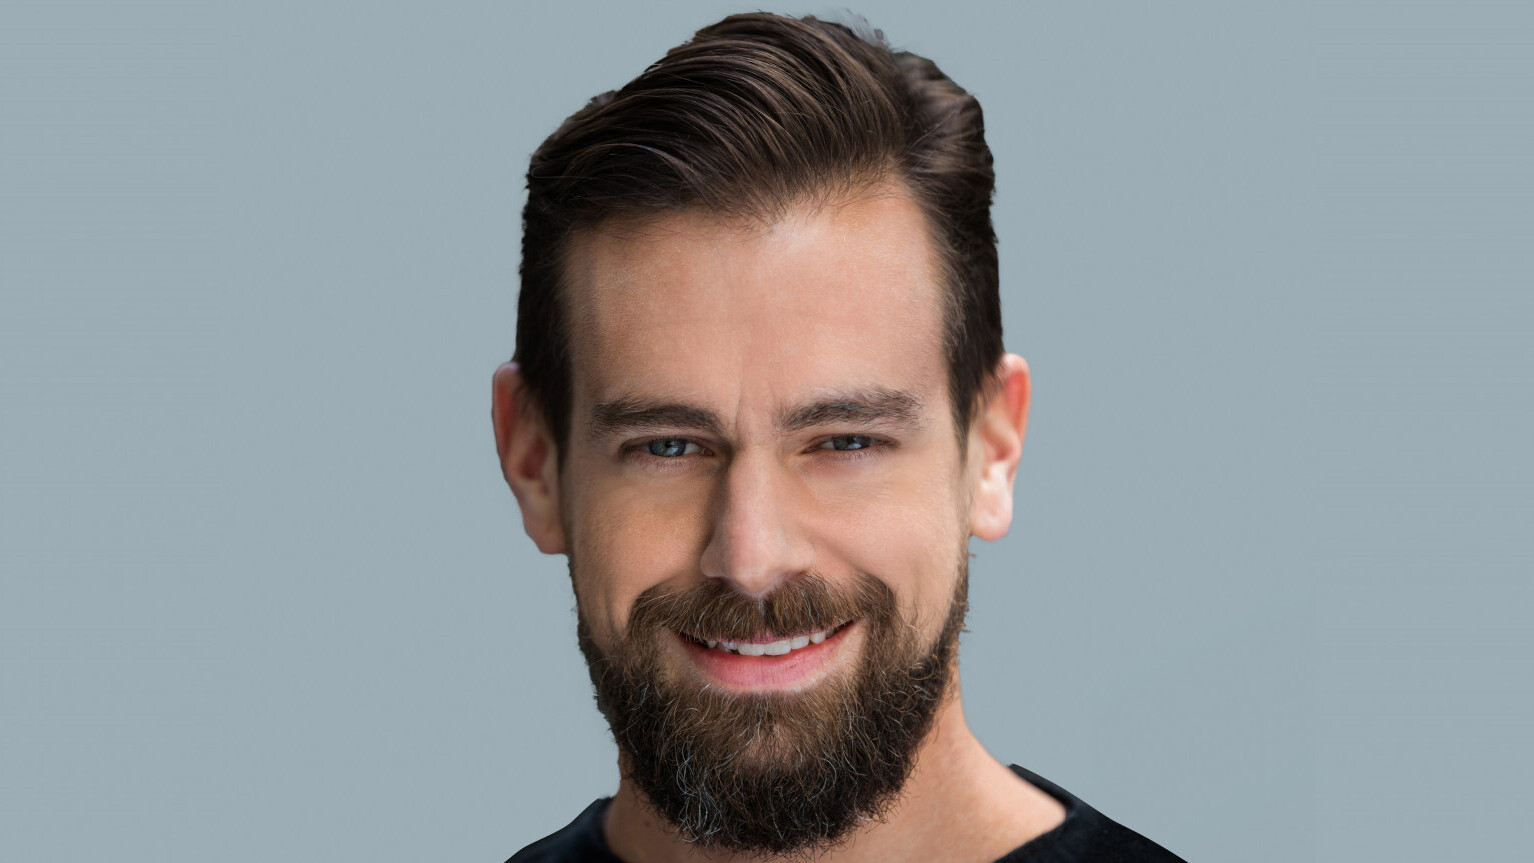 Twitter’s new stakeholder reportedly wants to remove CEO Jack Dorsey